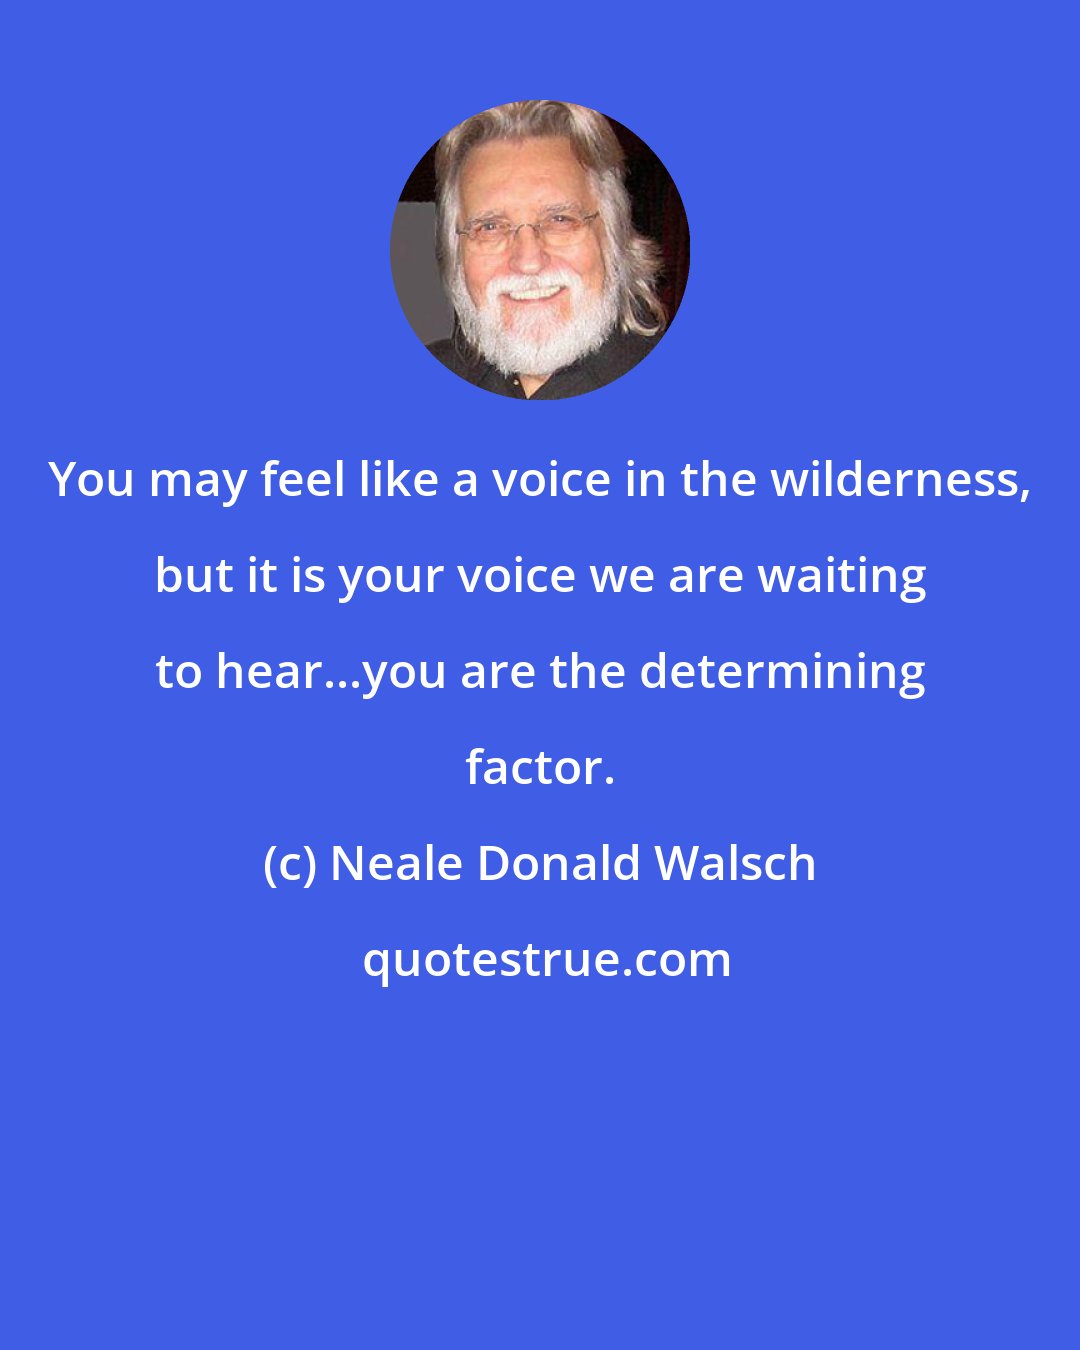 Neale Donald Walsch: You may feel like a voice in the wilderness, but it is your voice we are waiting to hear...you are the determining factor.